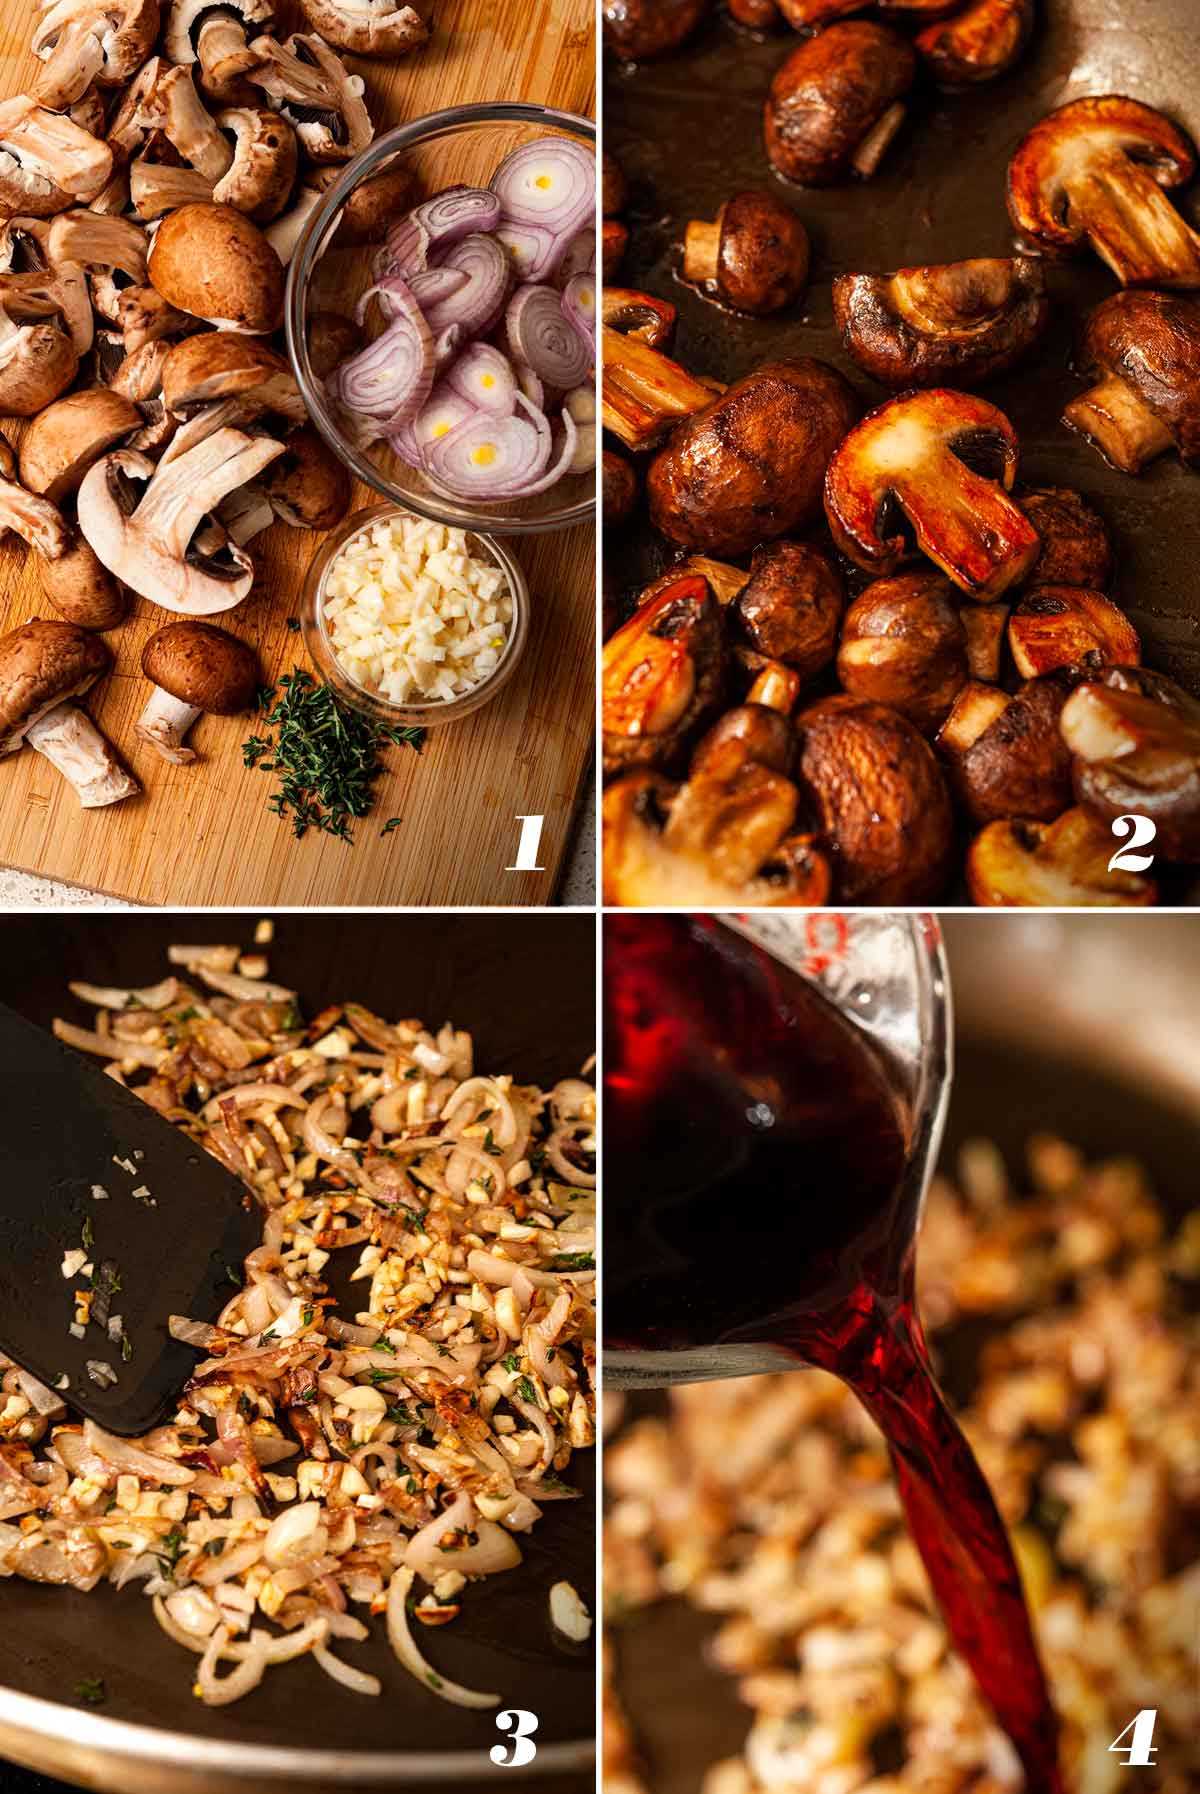 A collage of 4 numbered images showing how to prepare ingredients for red wine mushroom sauce.